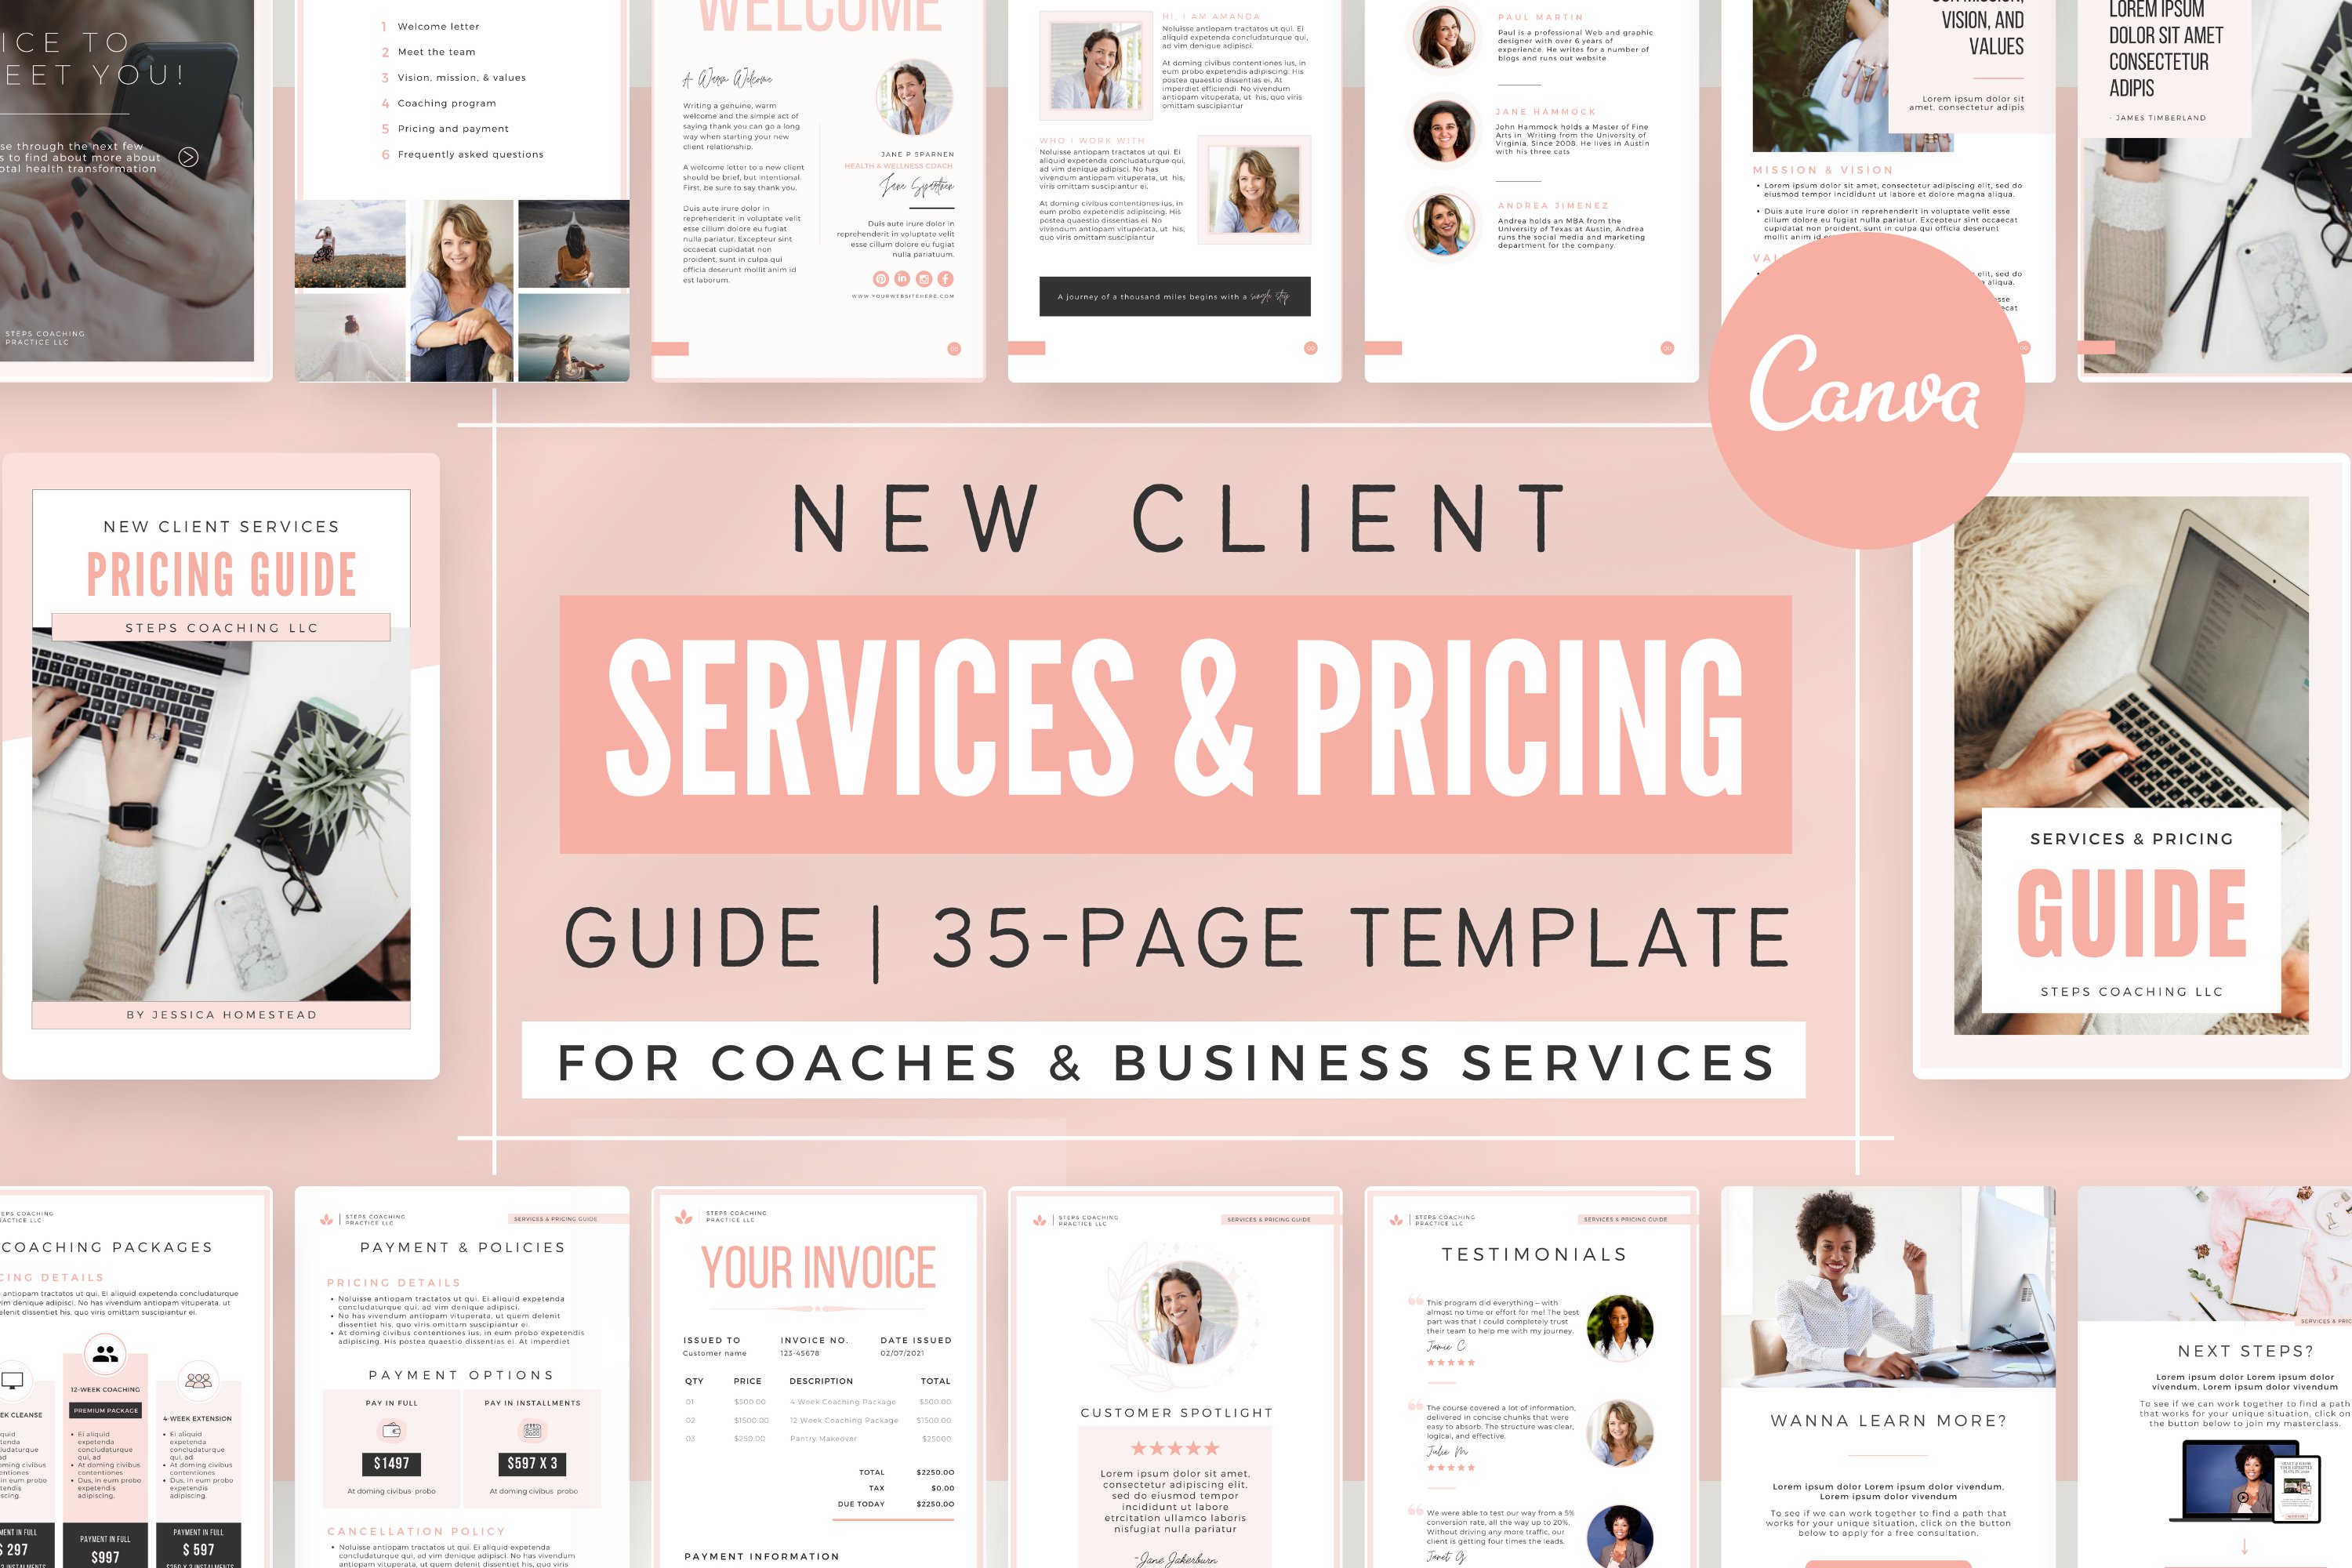 Client Service & Pricing Guide Coach cover image.